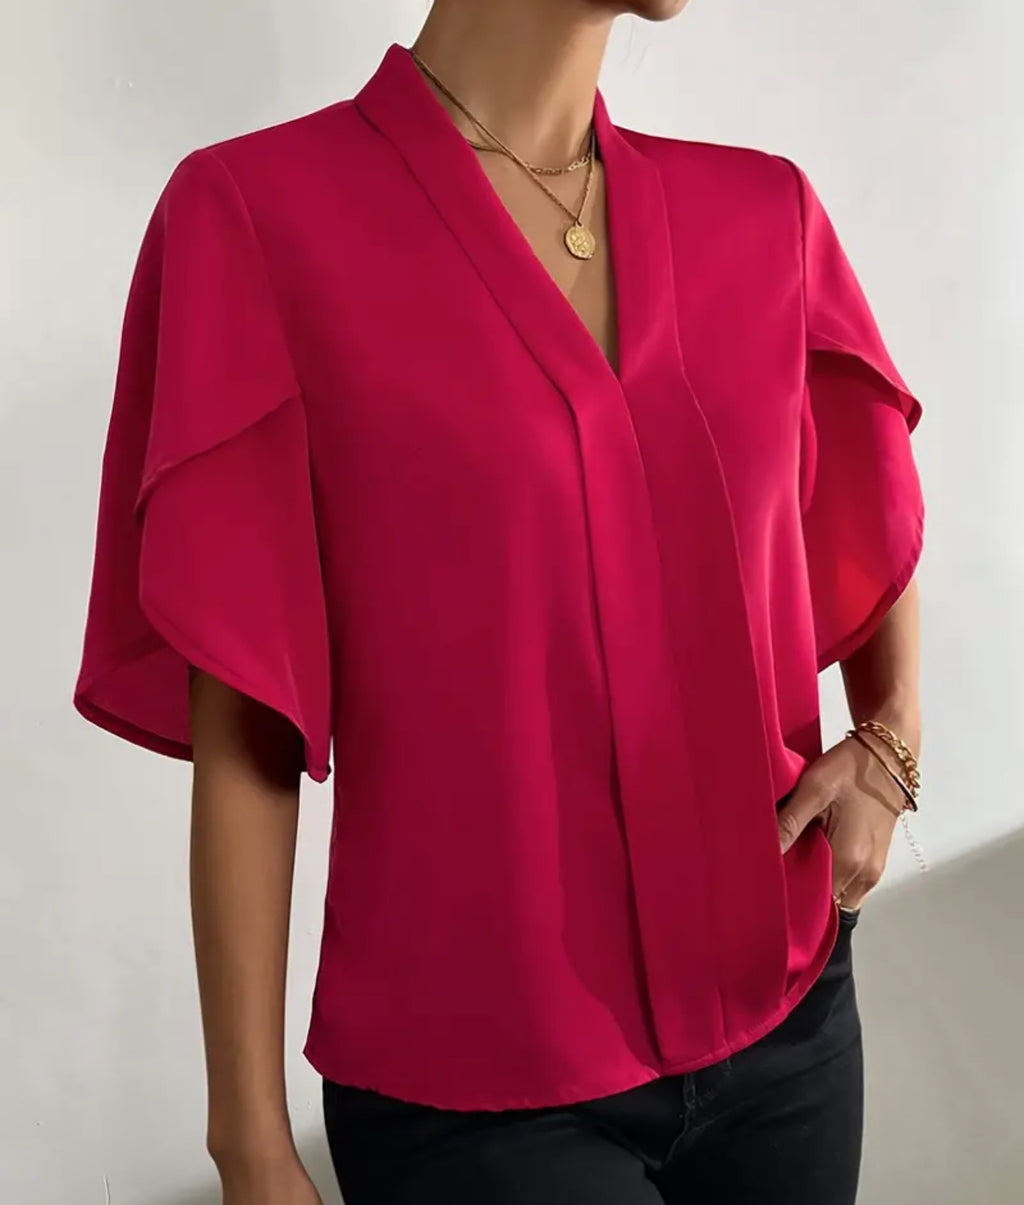 Red Rose “Blouse”